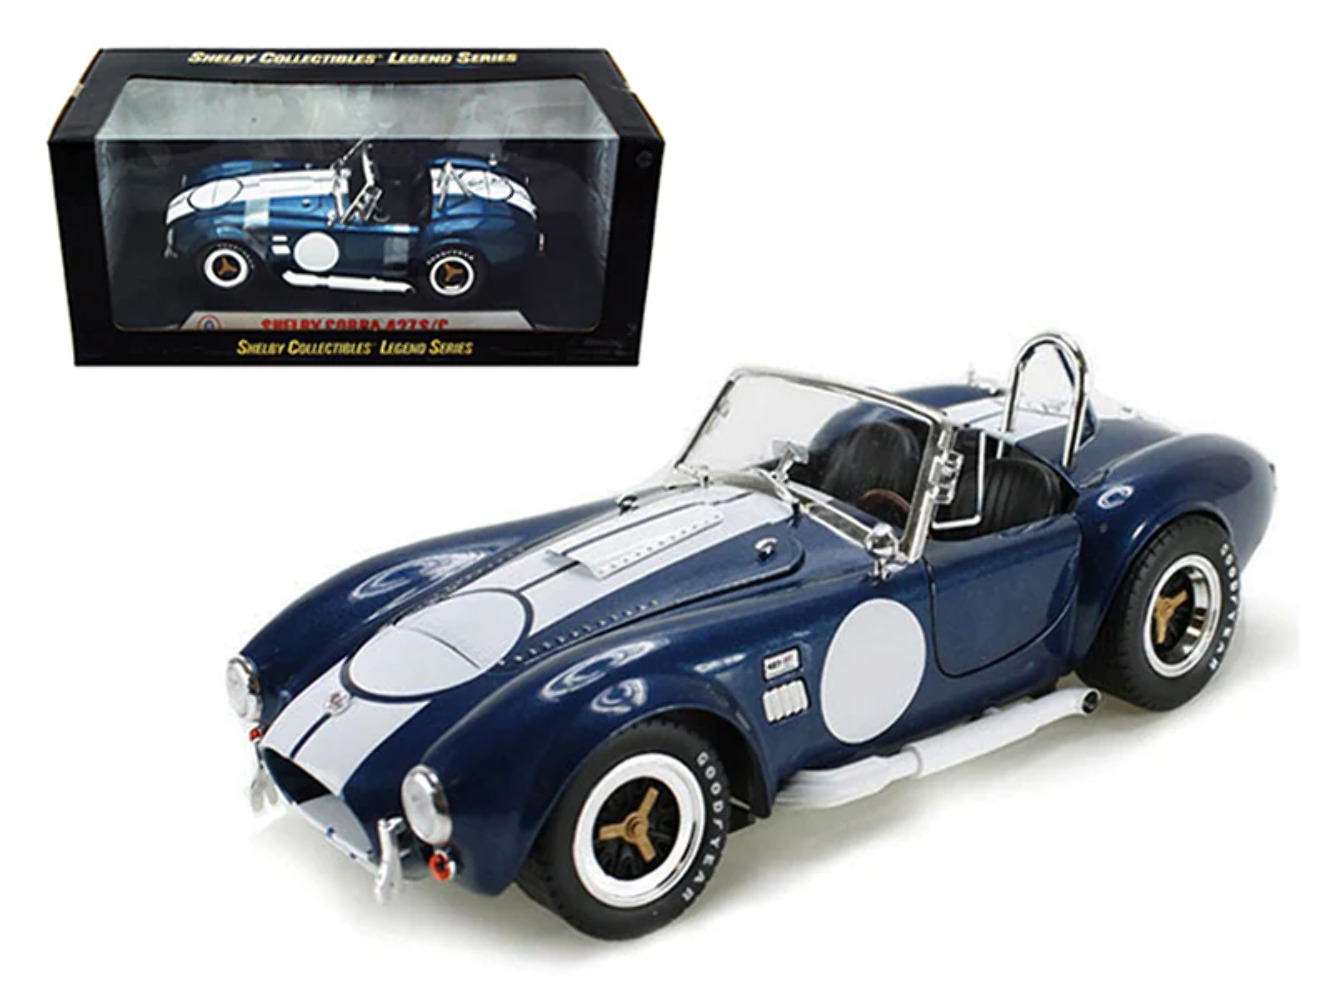 1965 Shelby Cobra 427 S/C Dark Blue Metallic with White Stripes with Printed Car